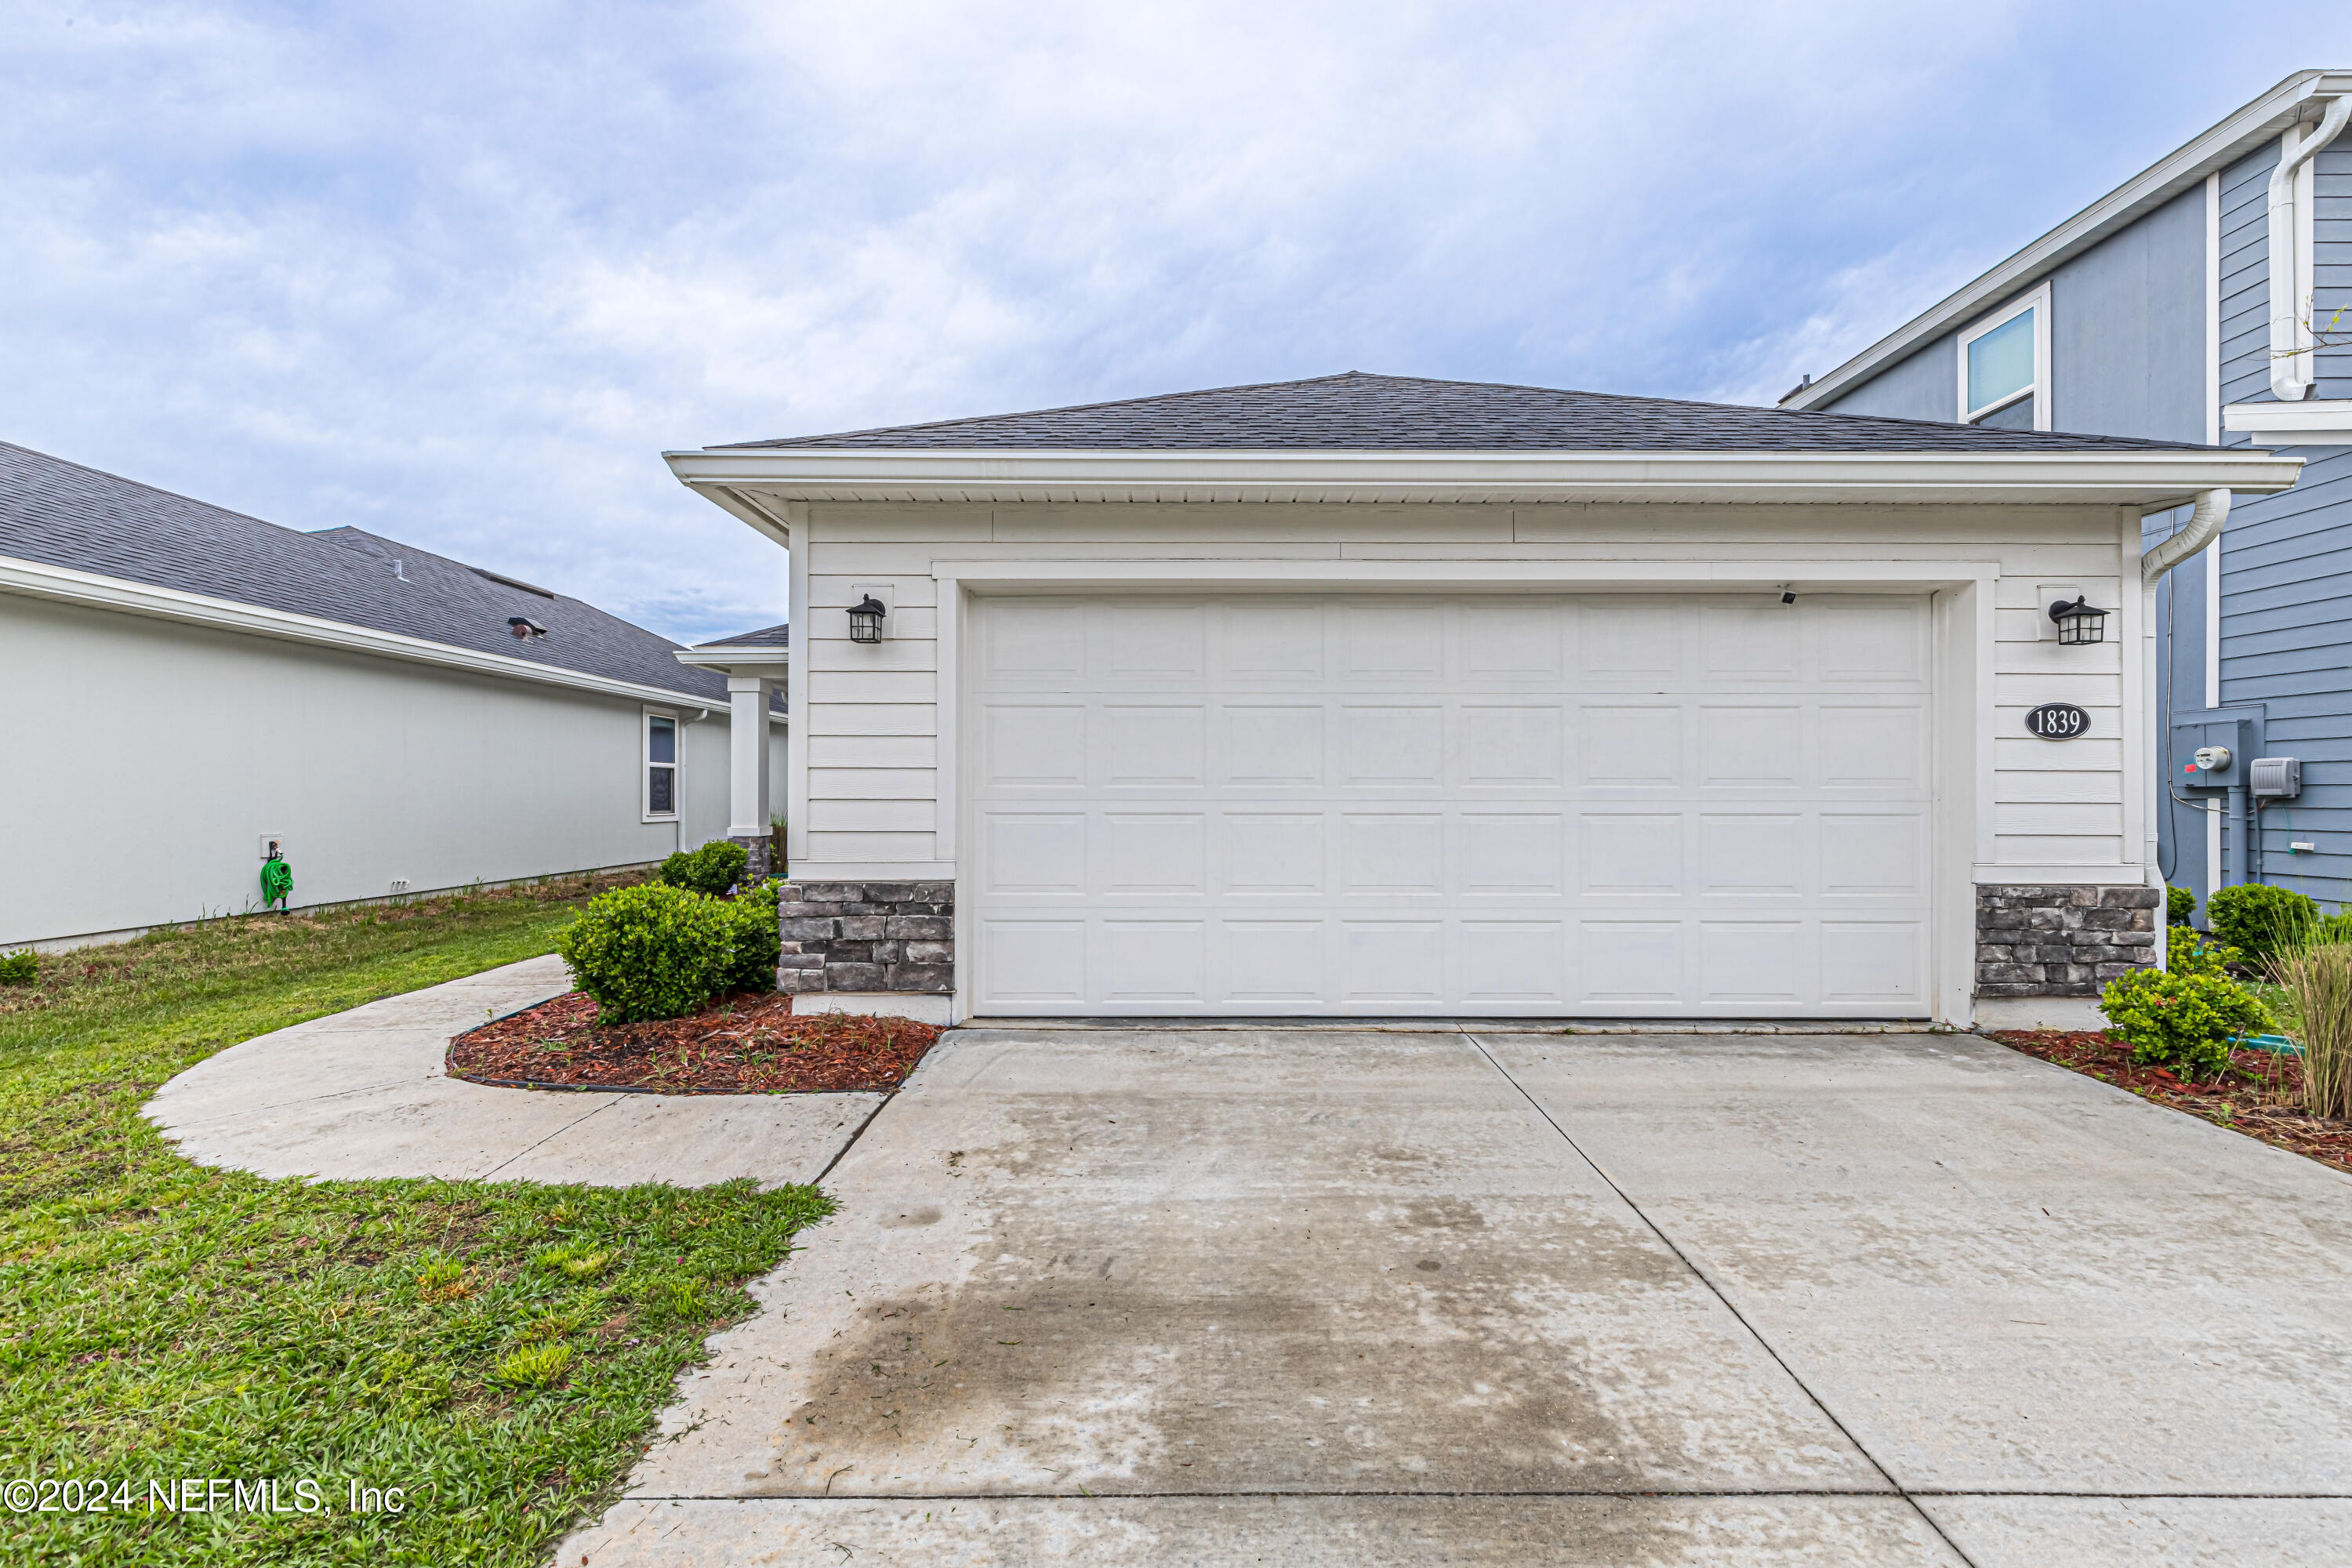 Jacksonville, FL home for sale located at 1839 MAXINE BR Way, Jacksonville, FL 32218